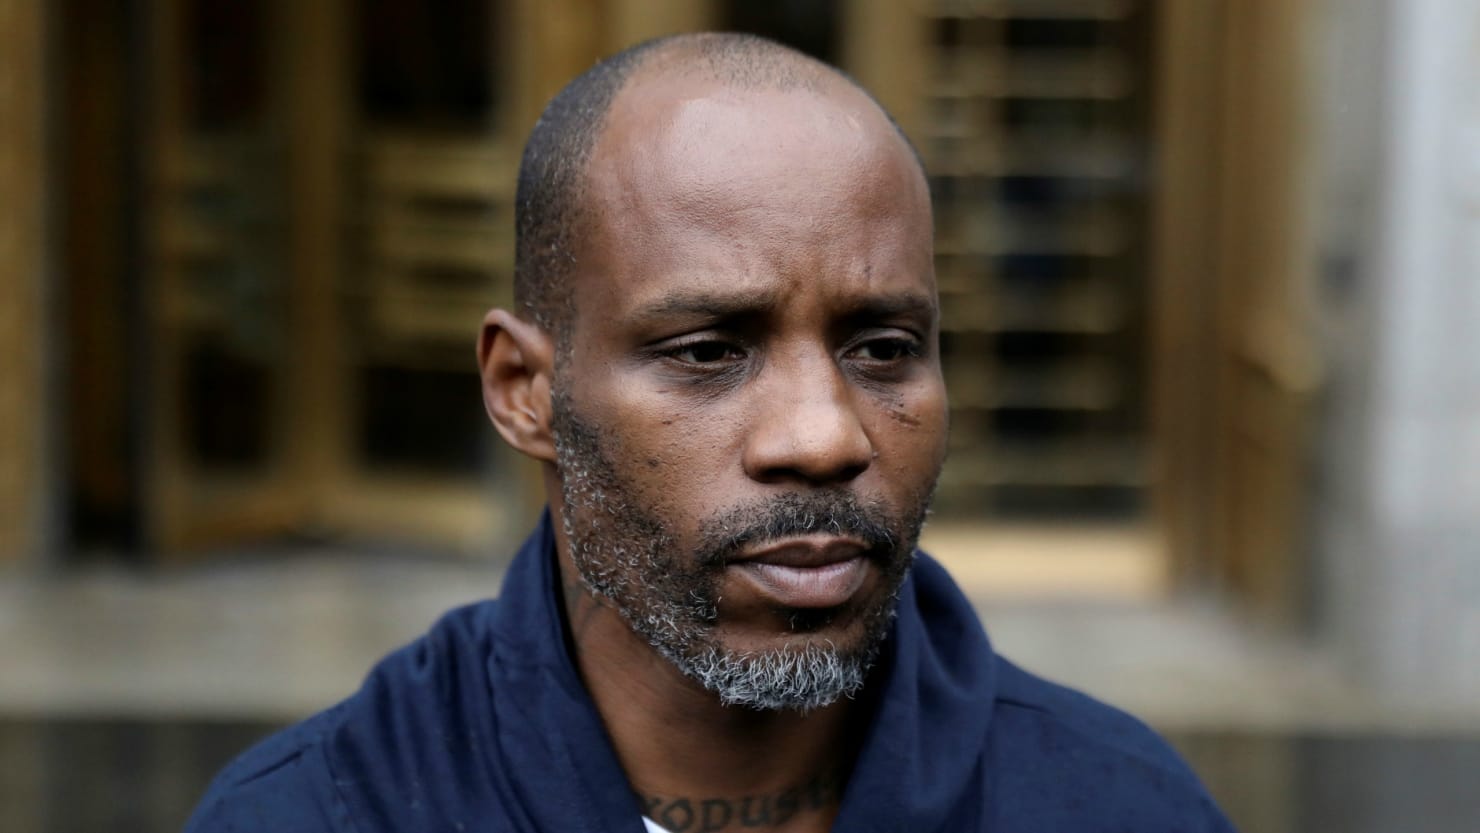 DMX Sentenced In Manhattan Federal Court To One Year In Prison For Tax Fraud